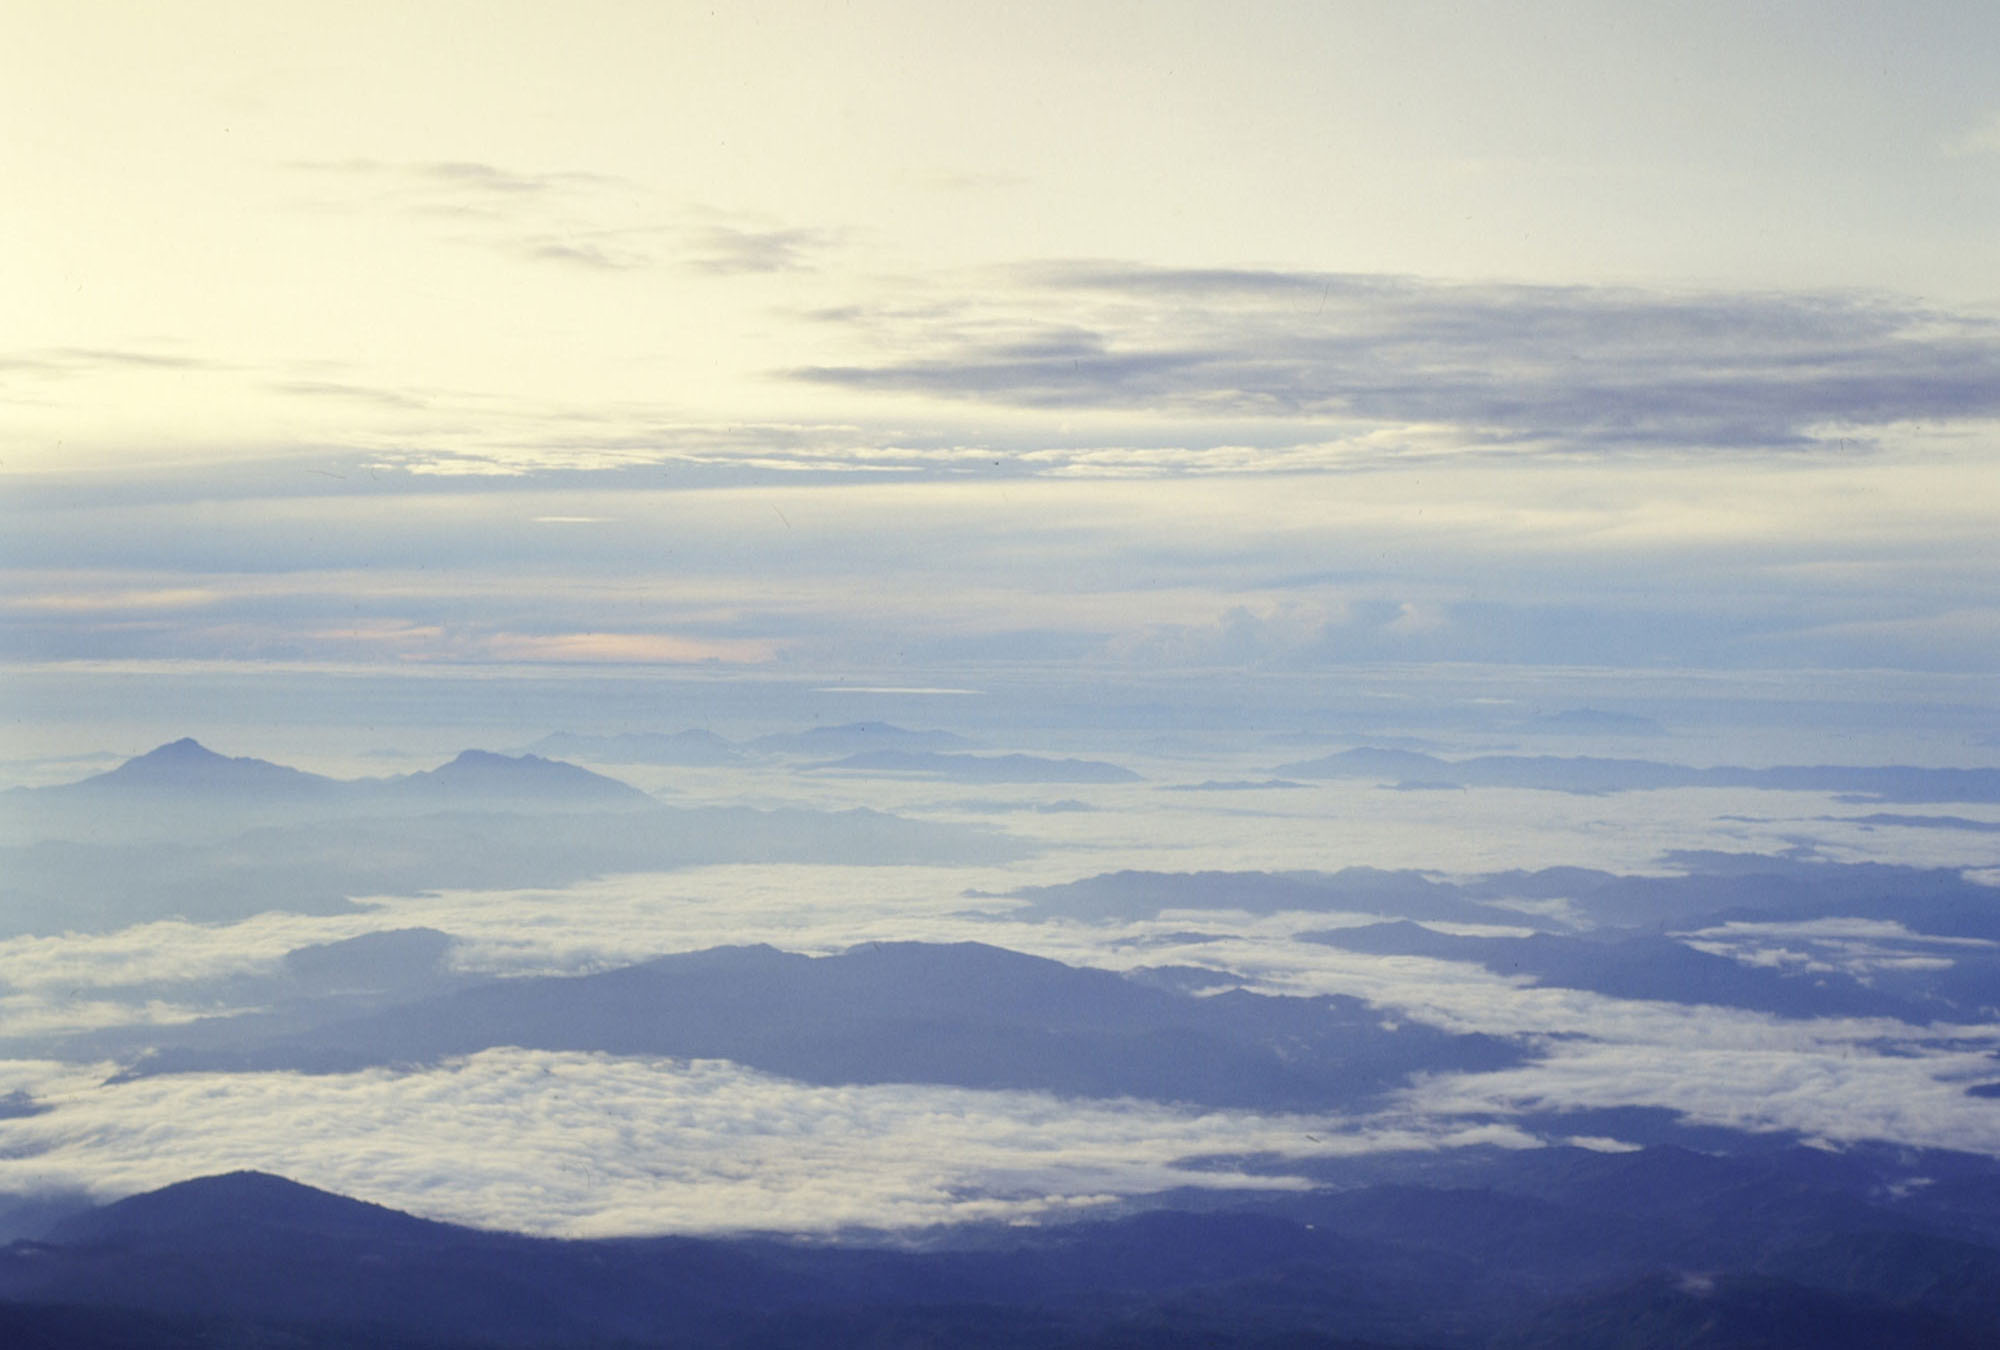 View from Mount Kinabalu